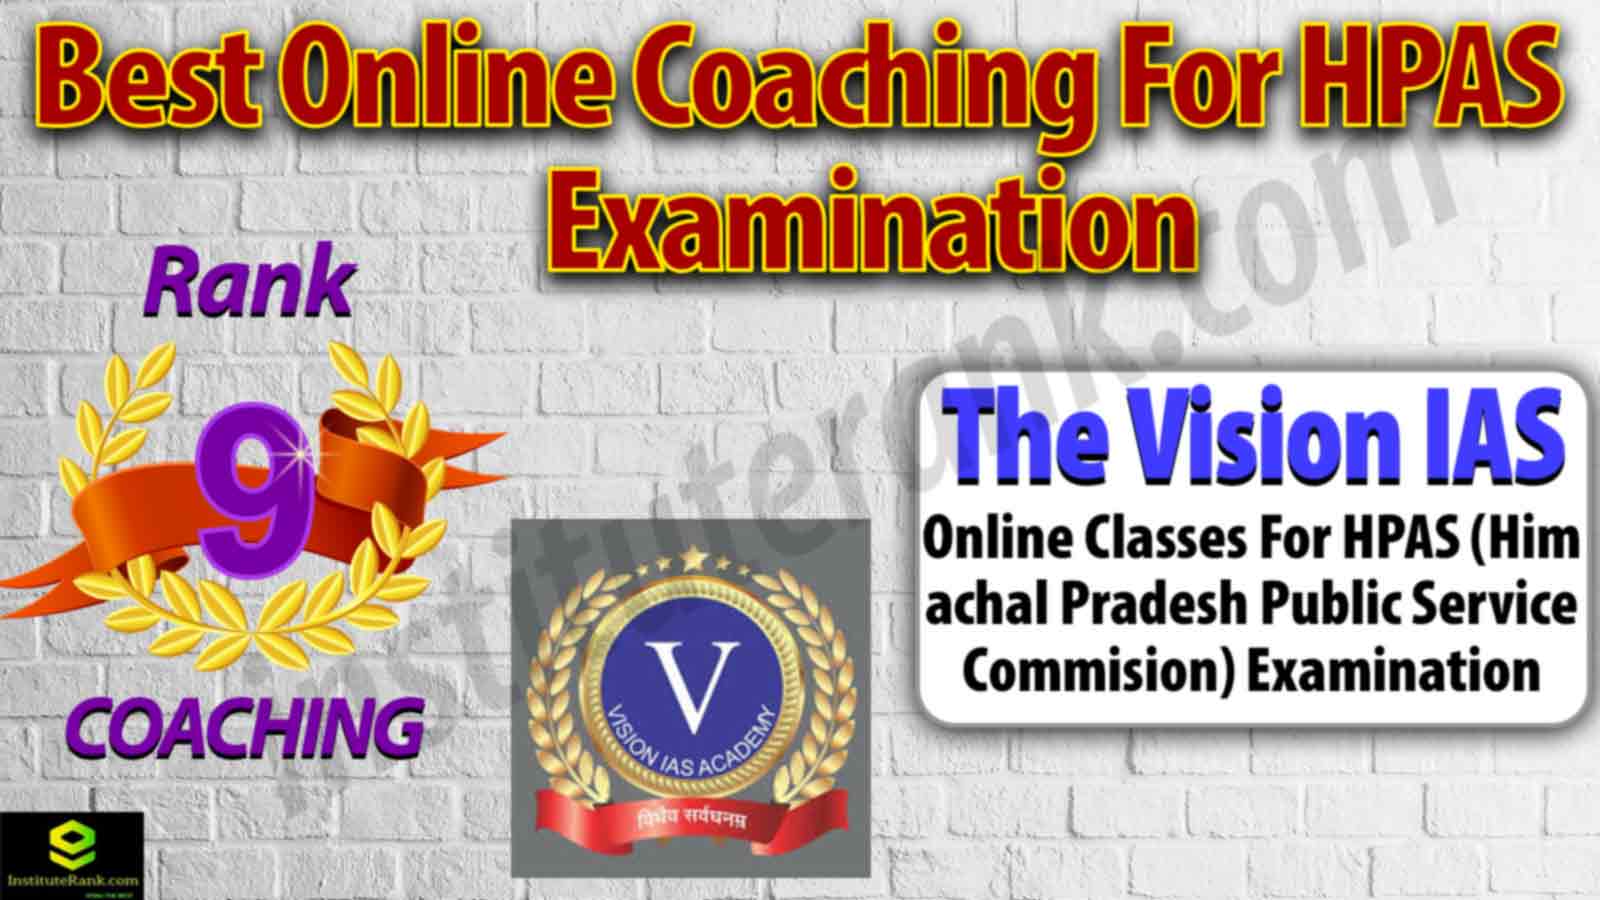 Best Online Coaching for HPAS Exam Preparation